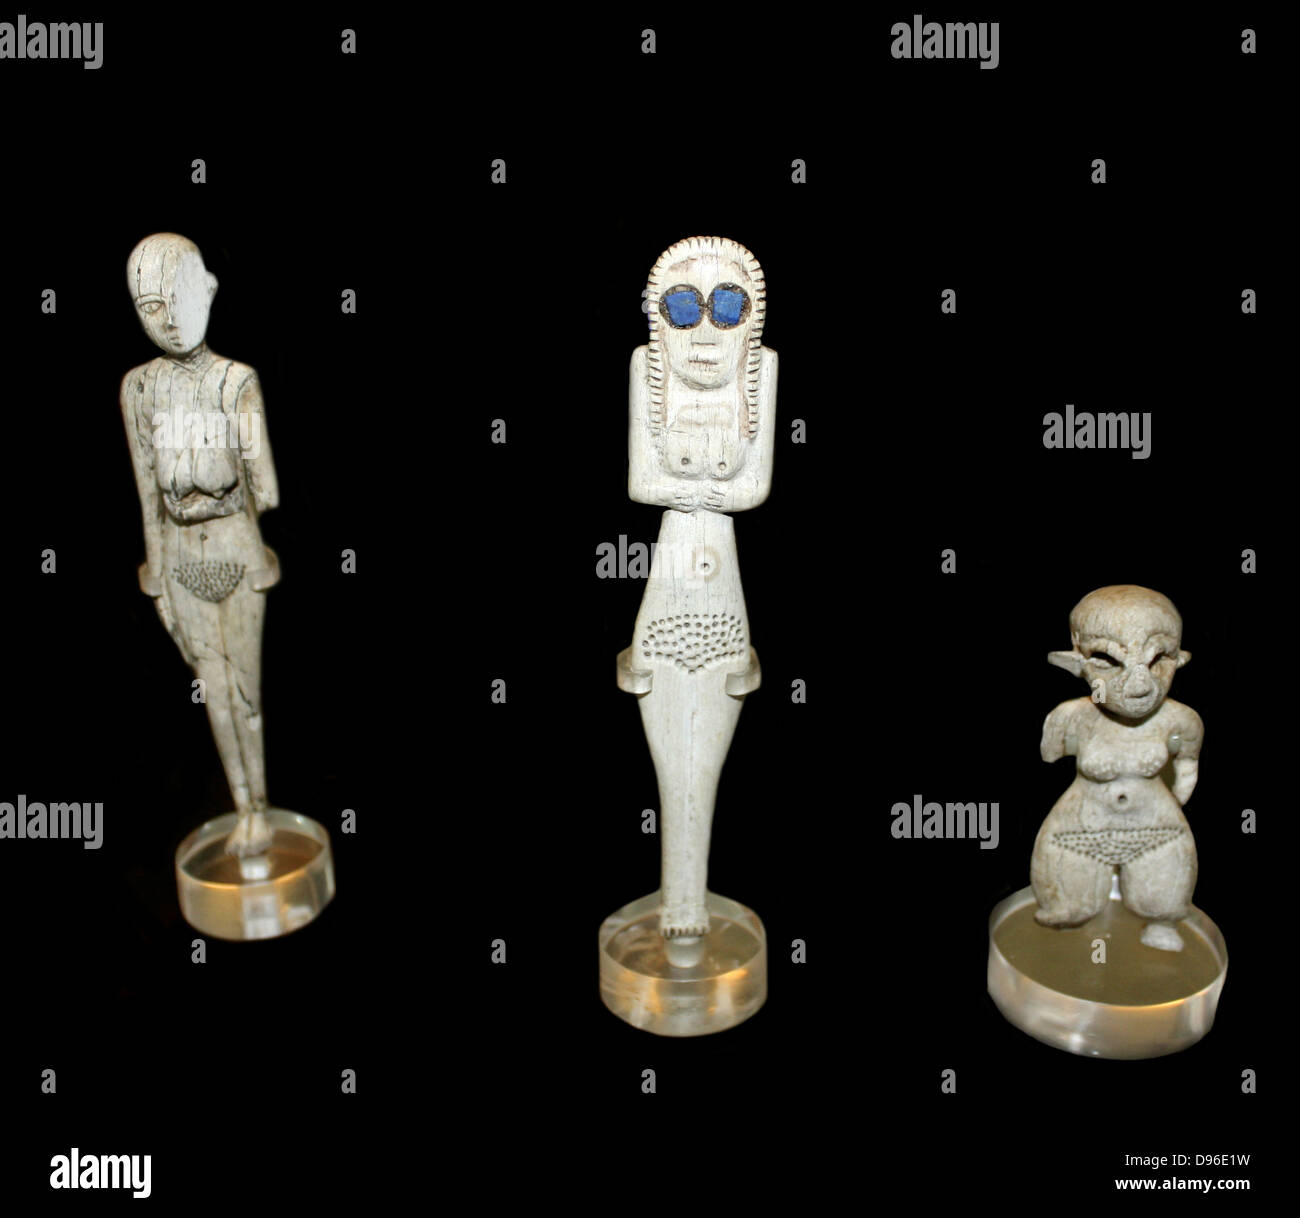 Figurines of bone and ivory. Predynastic, Naqada I. 4000-3600 BC. Ivory and bone figures of this type first appeared in the Naqada I period and continued into Naqada II. The inlaid eyes in one example are of lapis-lazuli may be a later addition. Stock Photo